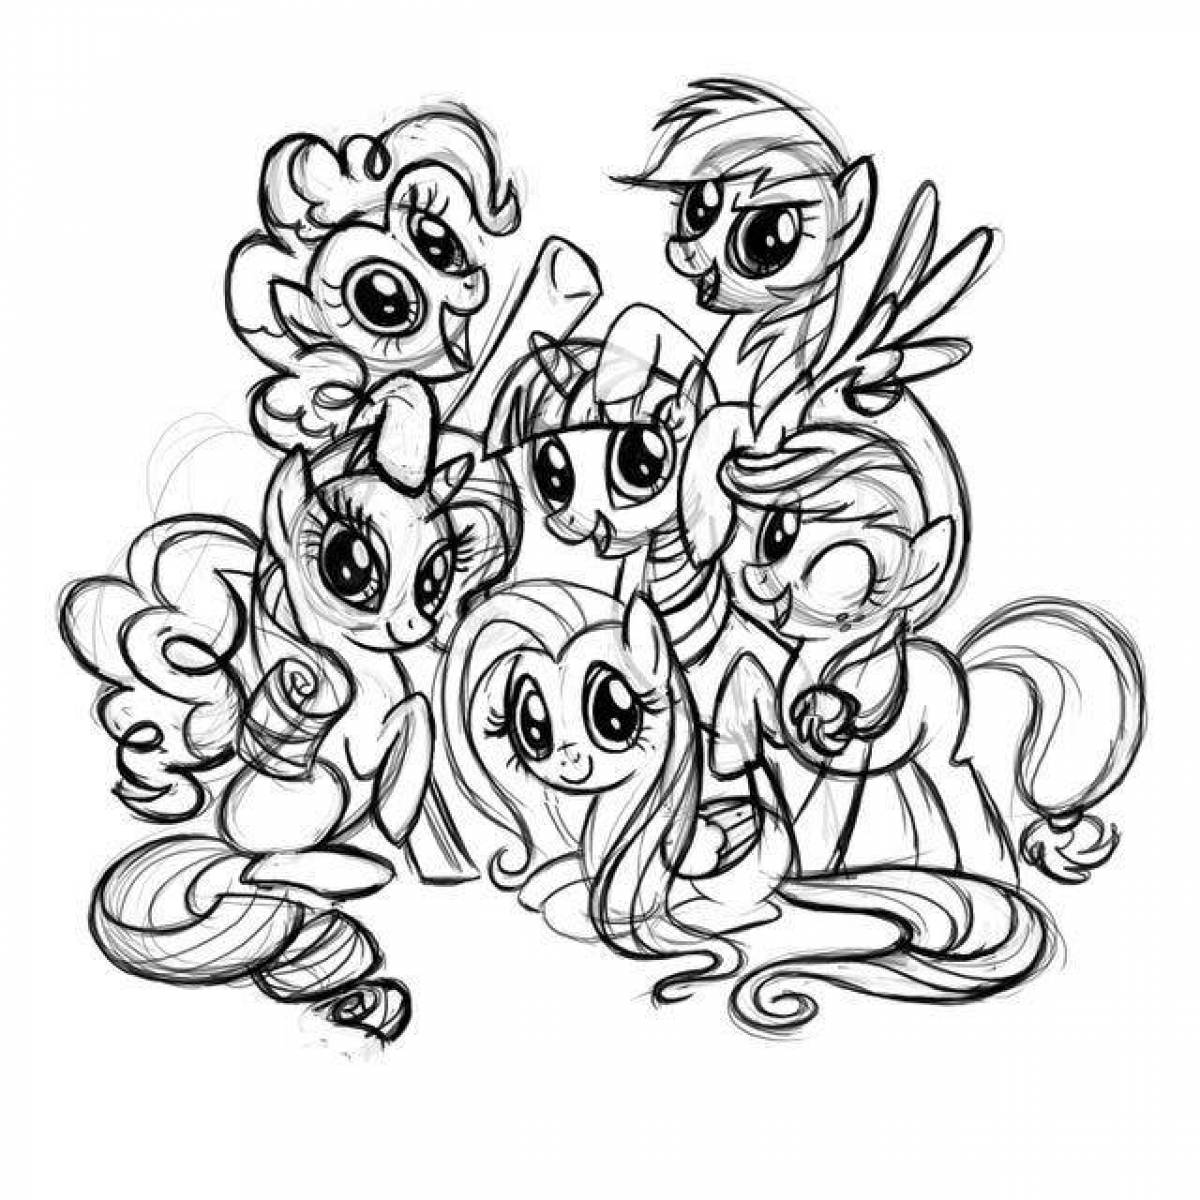 Brilliant coloring my little pony all together